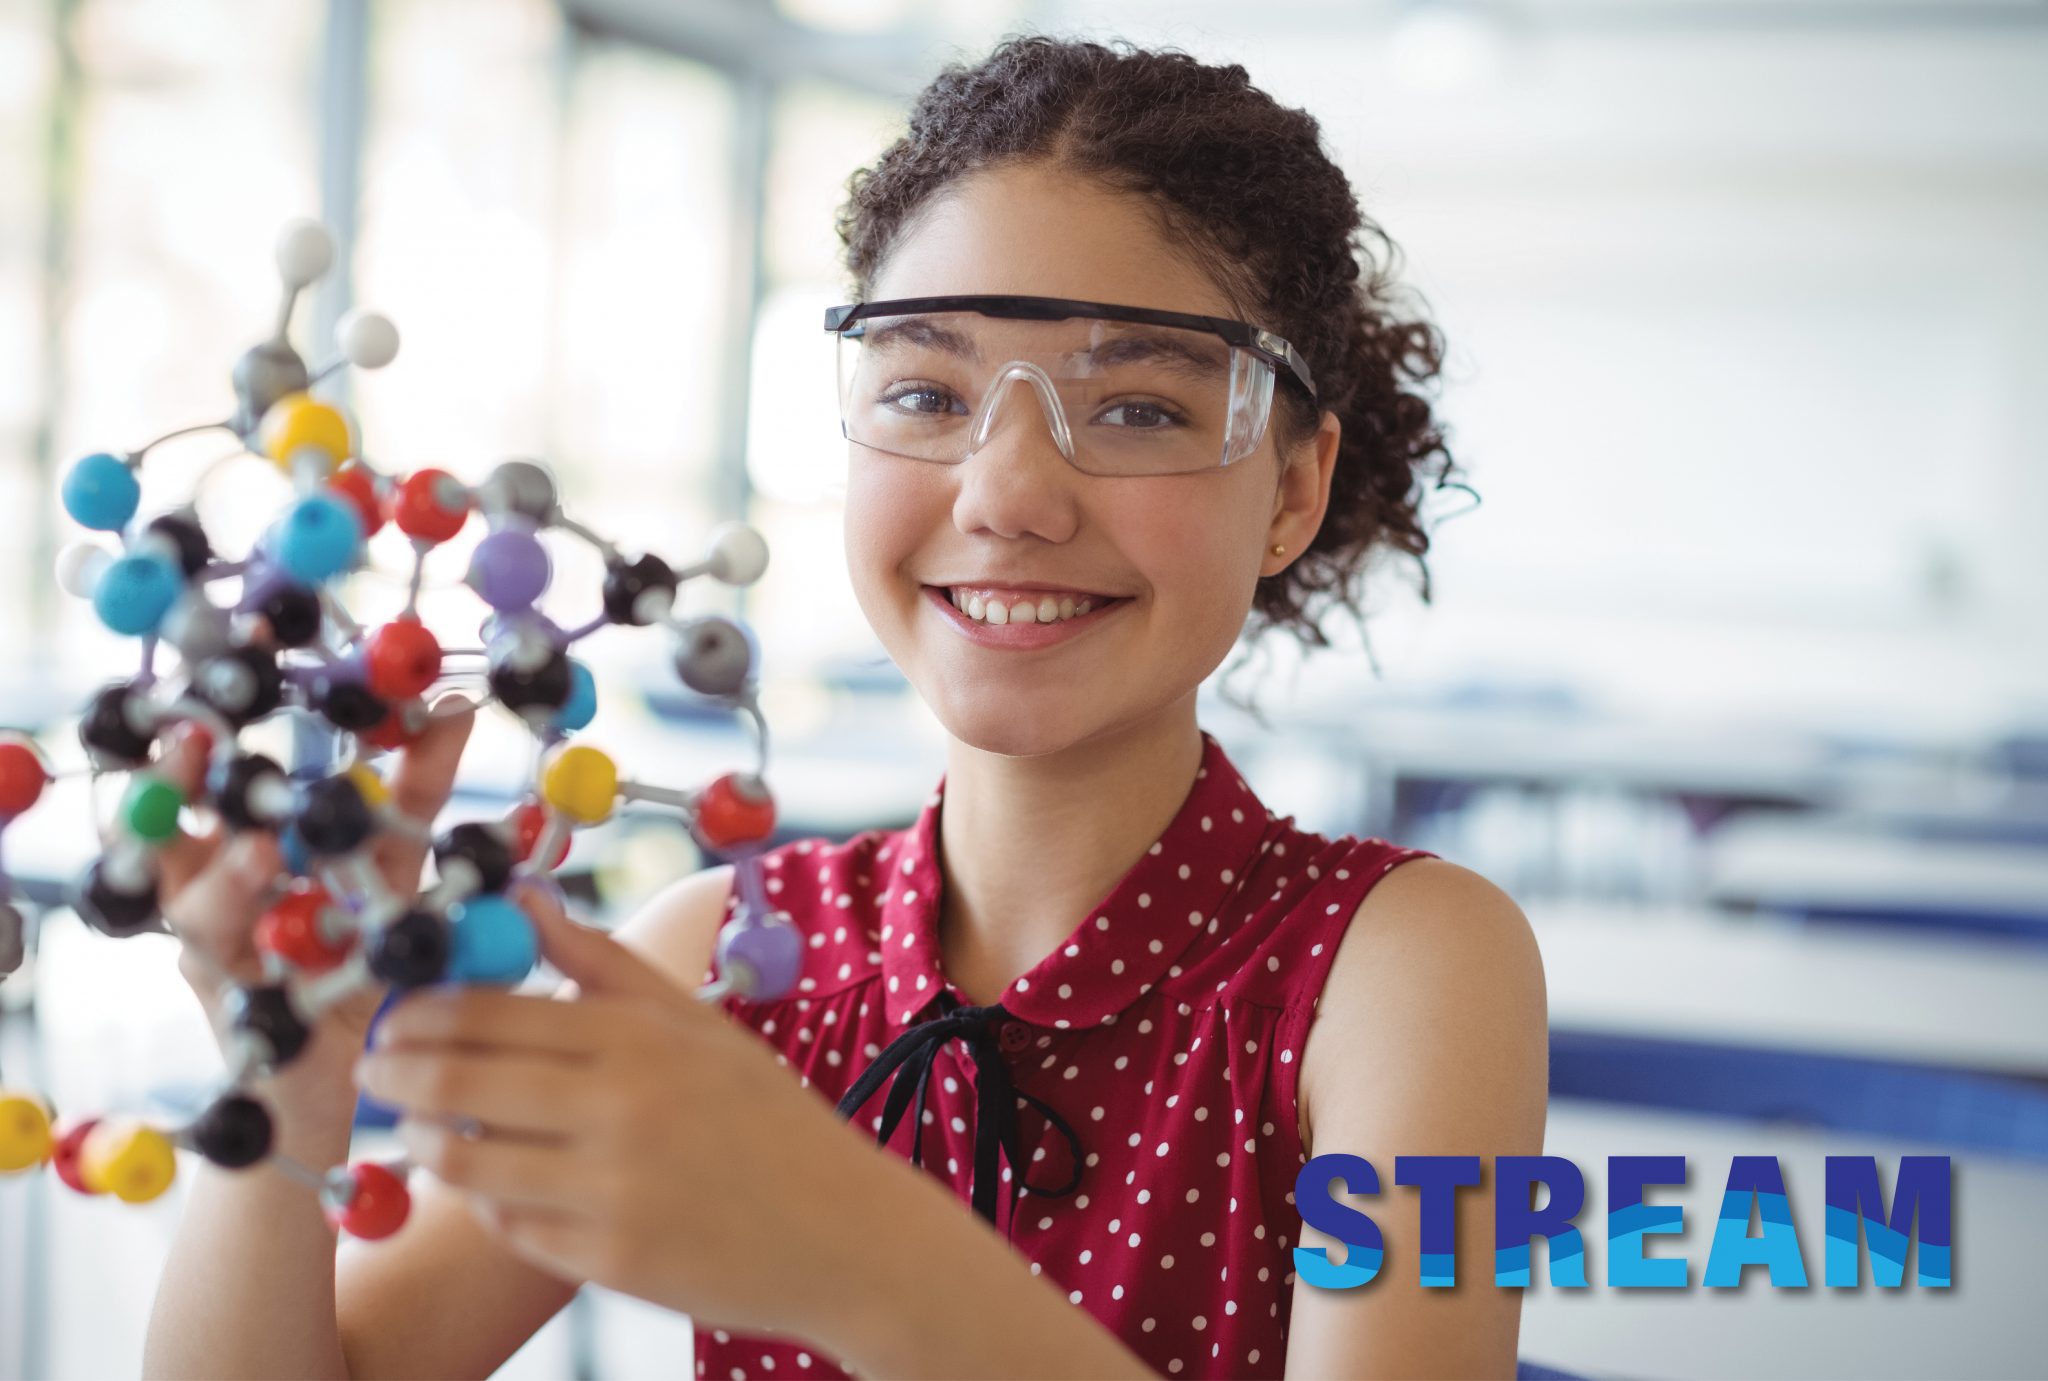 Middle school aged girl holds a scientific model while wearing safety glasses.